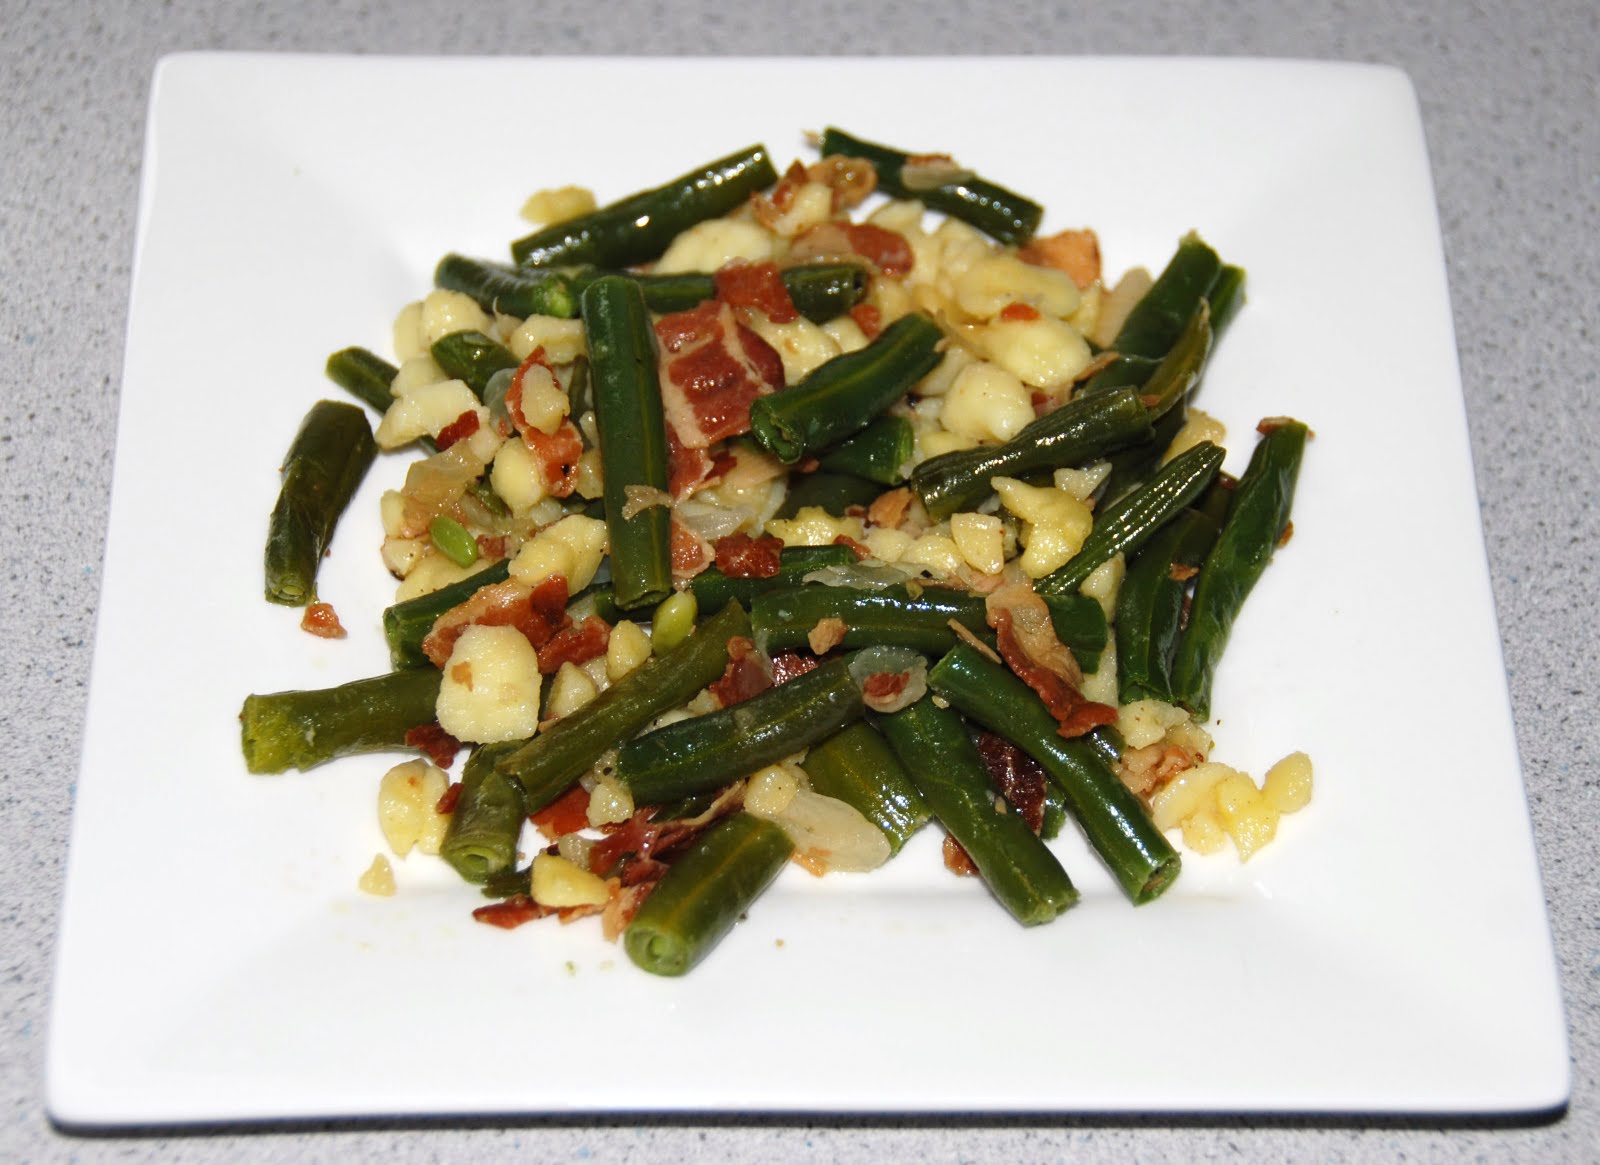 Recipes For Green Beans And Spaetzle - Find Vegetarian Recipes